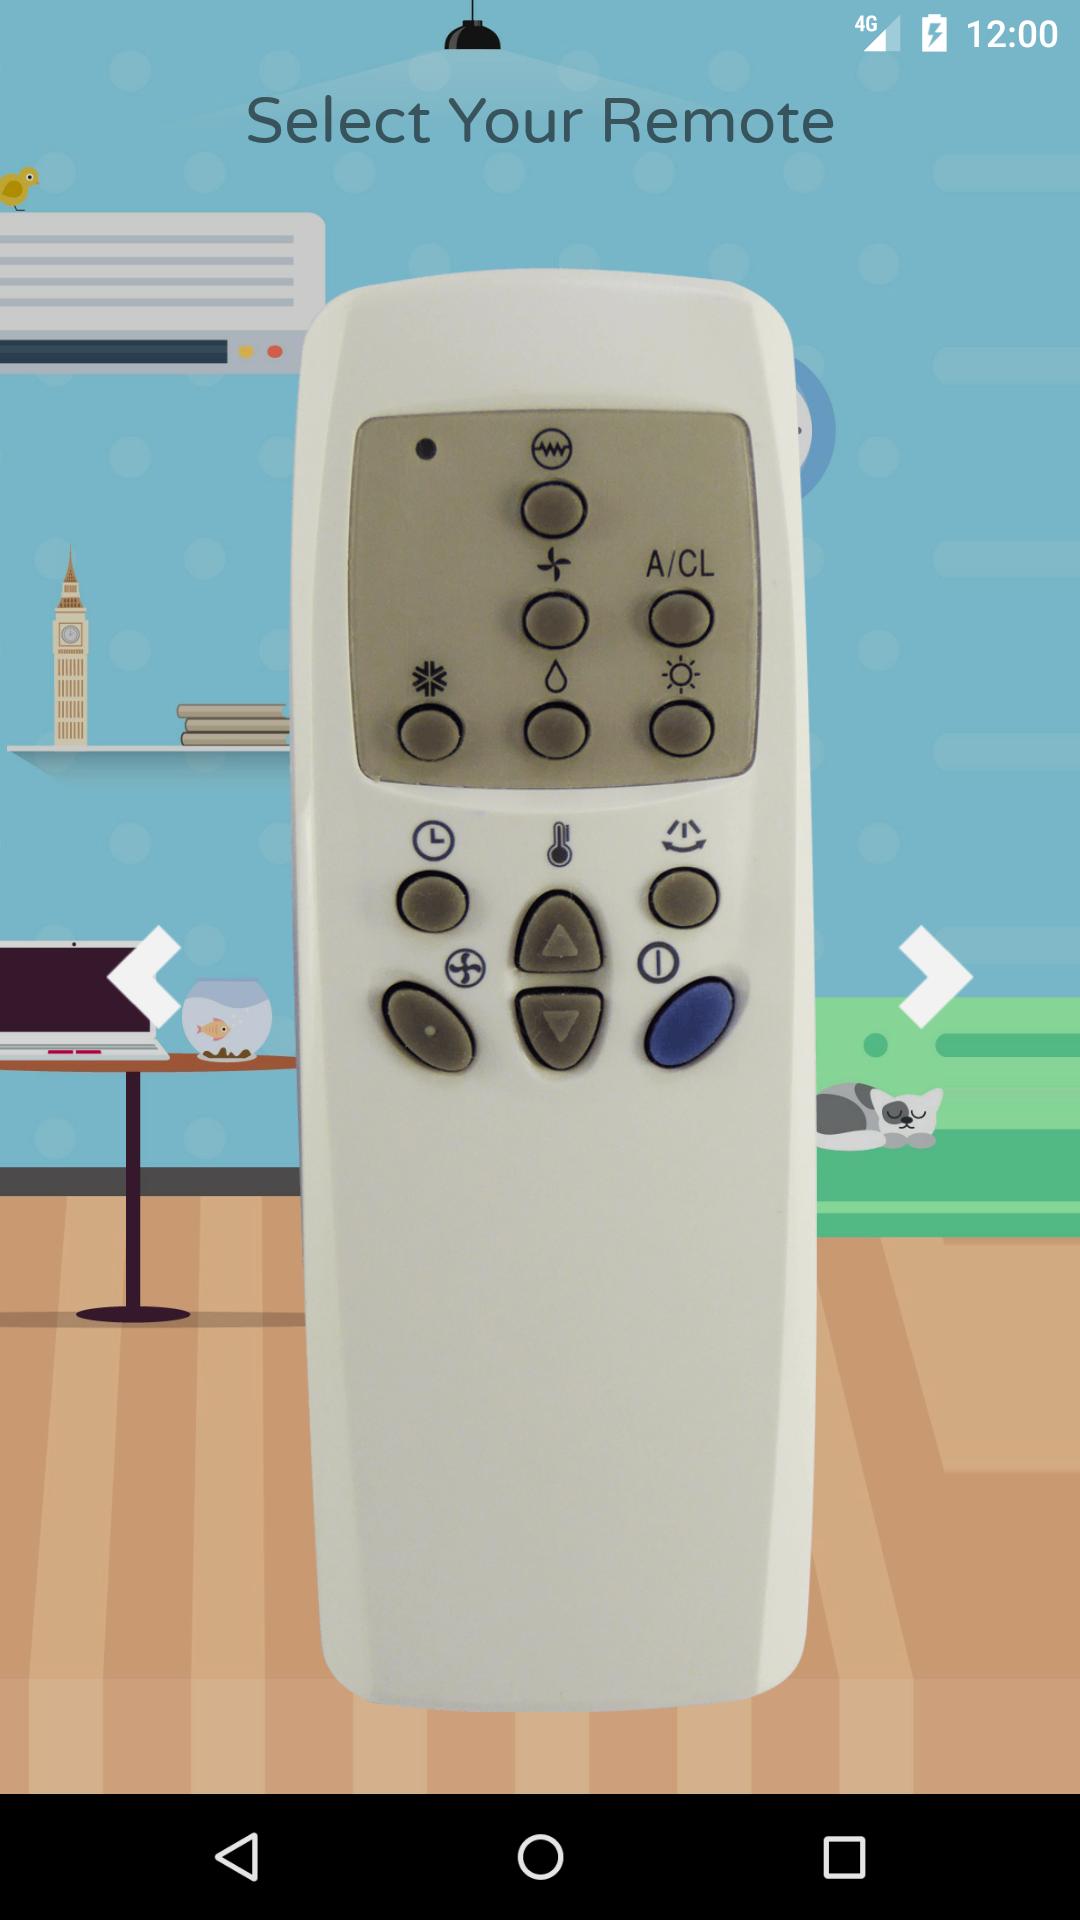 Remote Control For LG Air Conditioner for Android - APK ...